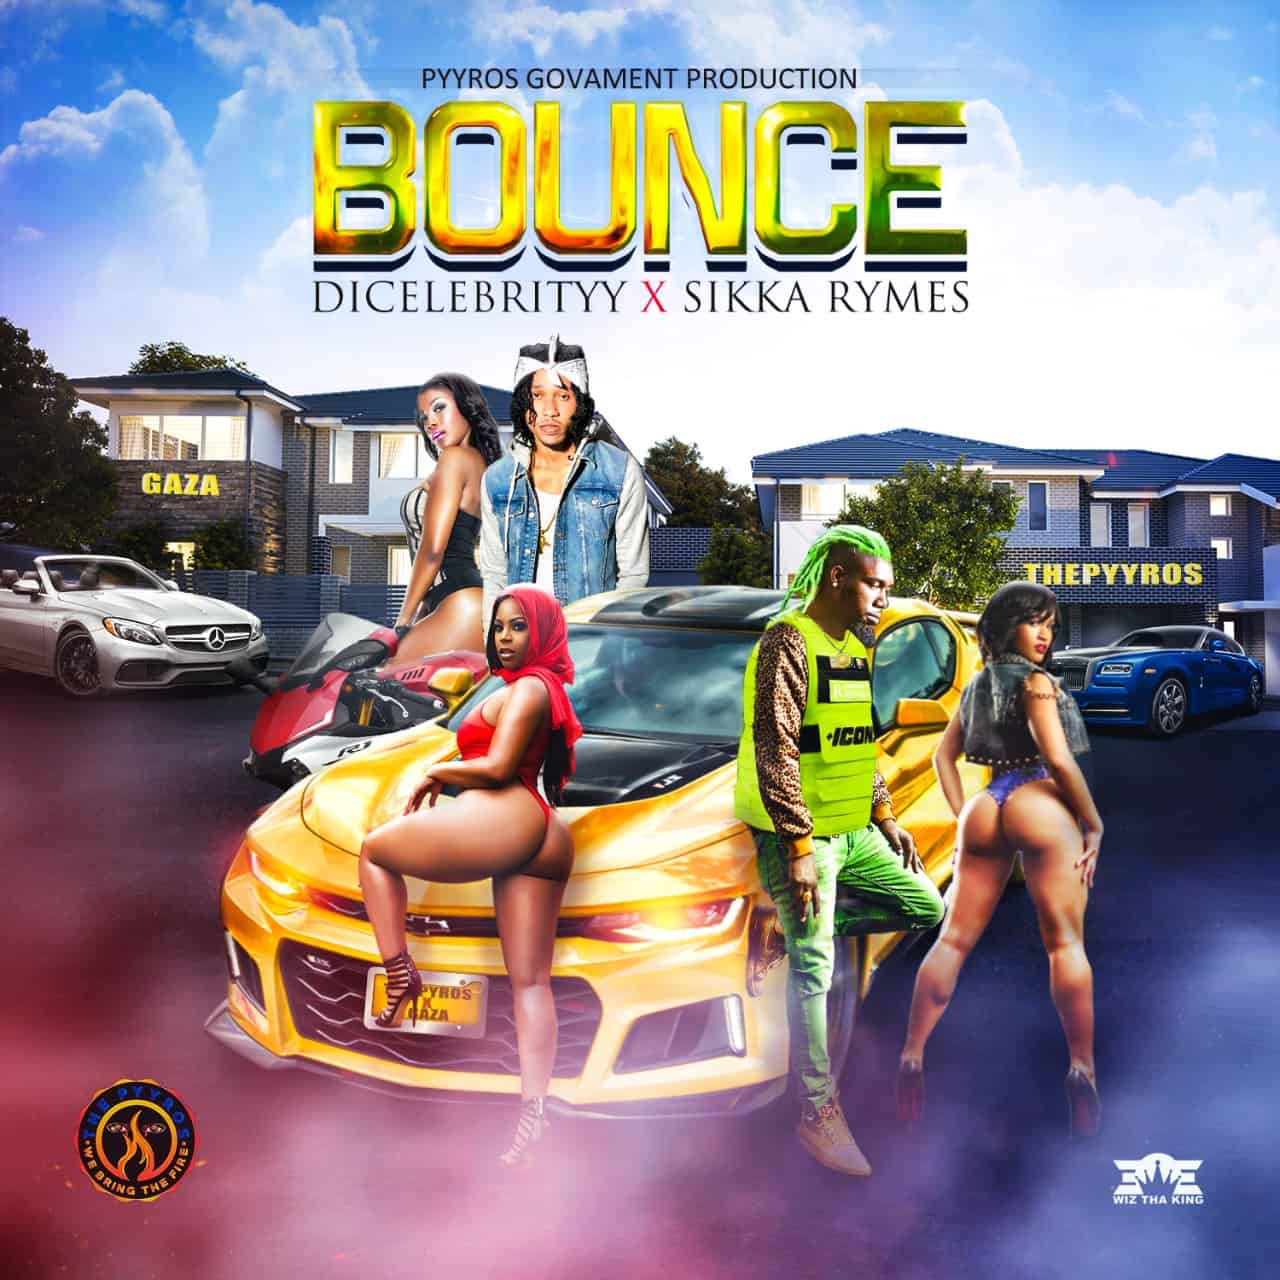 DiCelebrityy x Sikka Rymes - Bounce - 2020 Dancehall